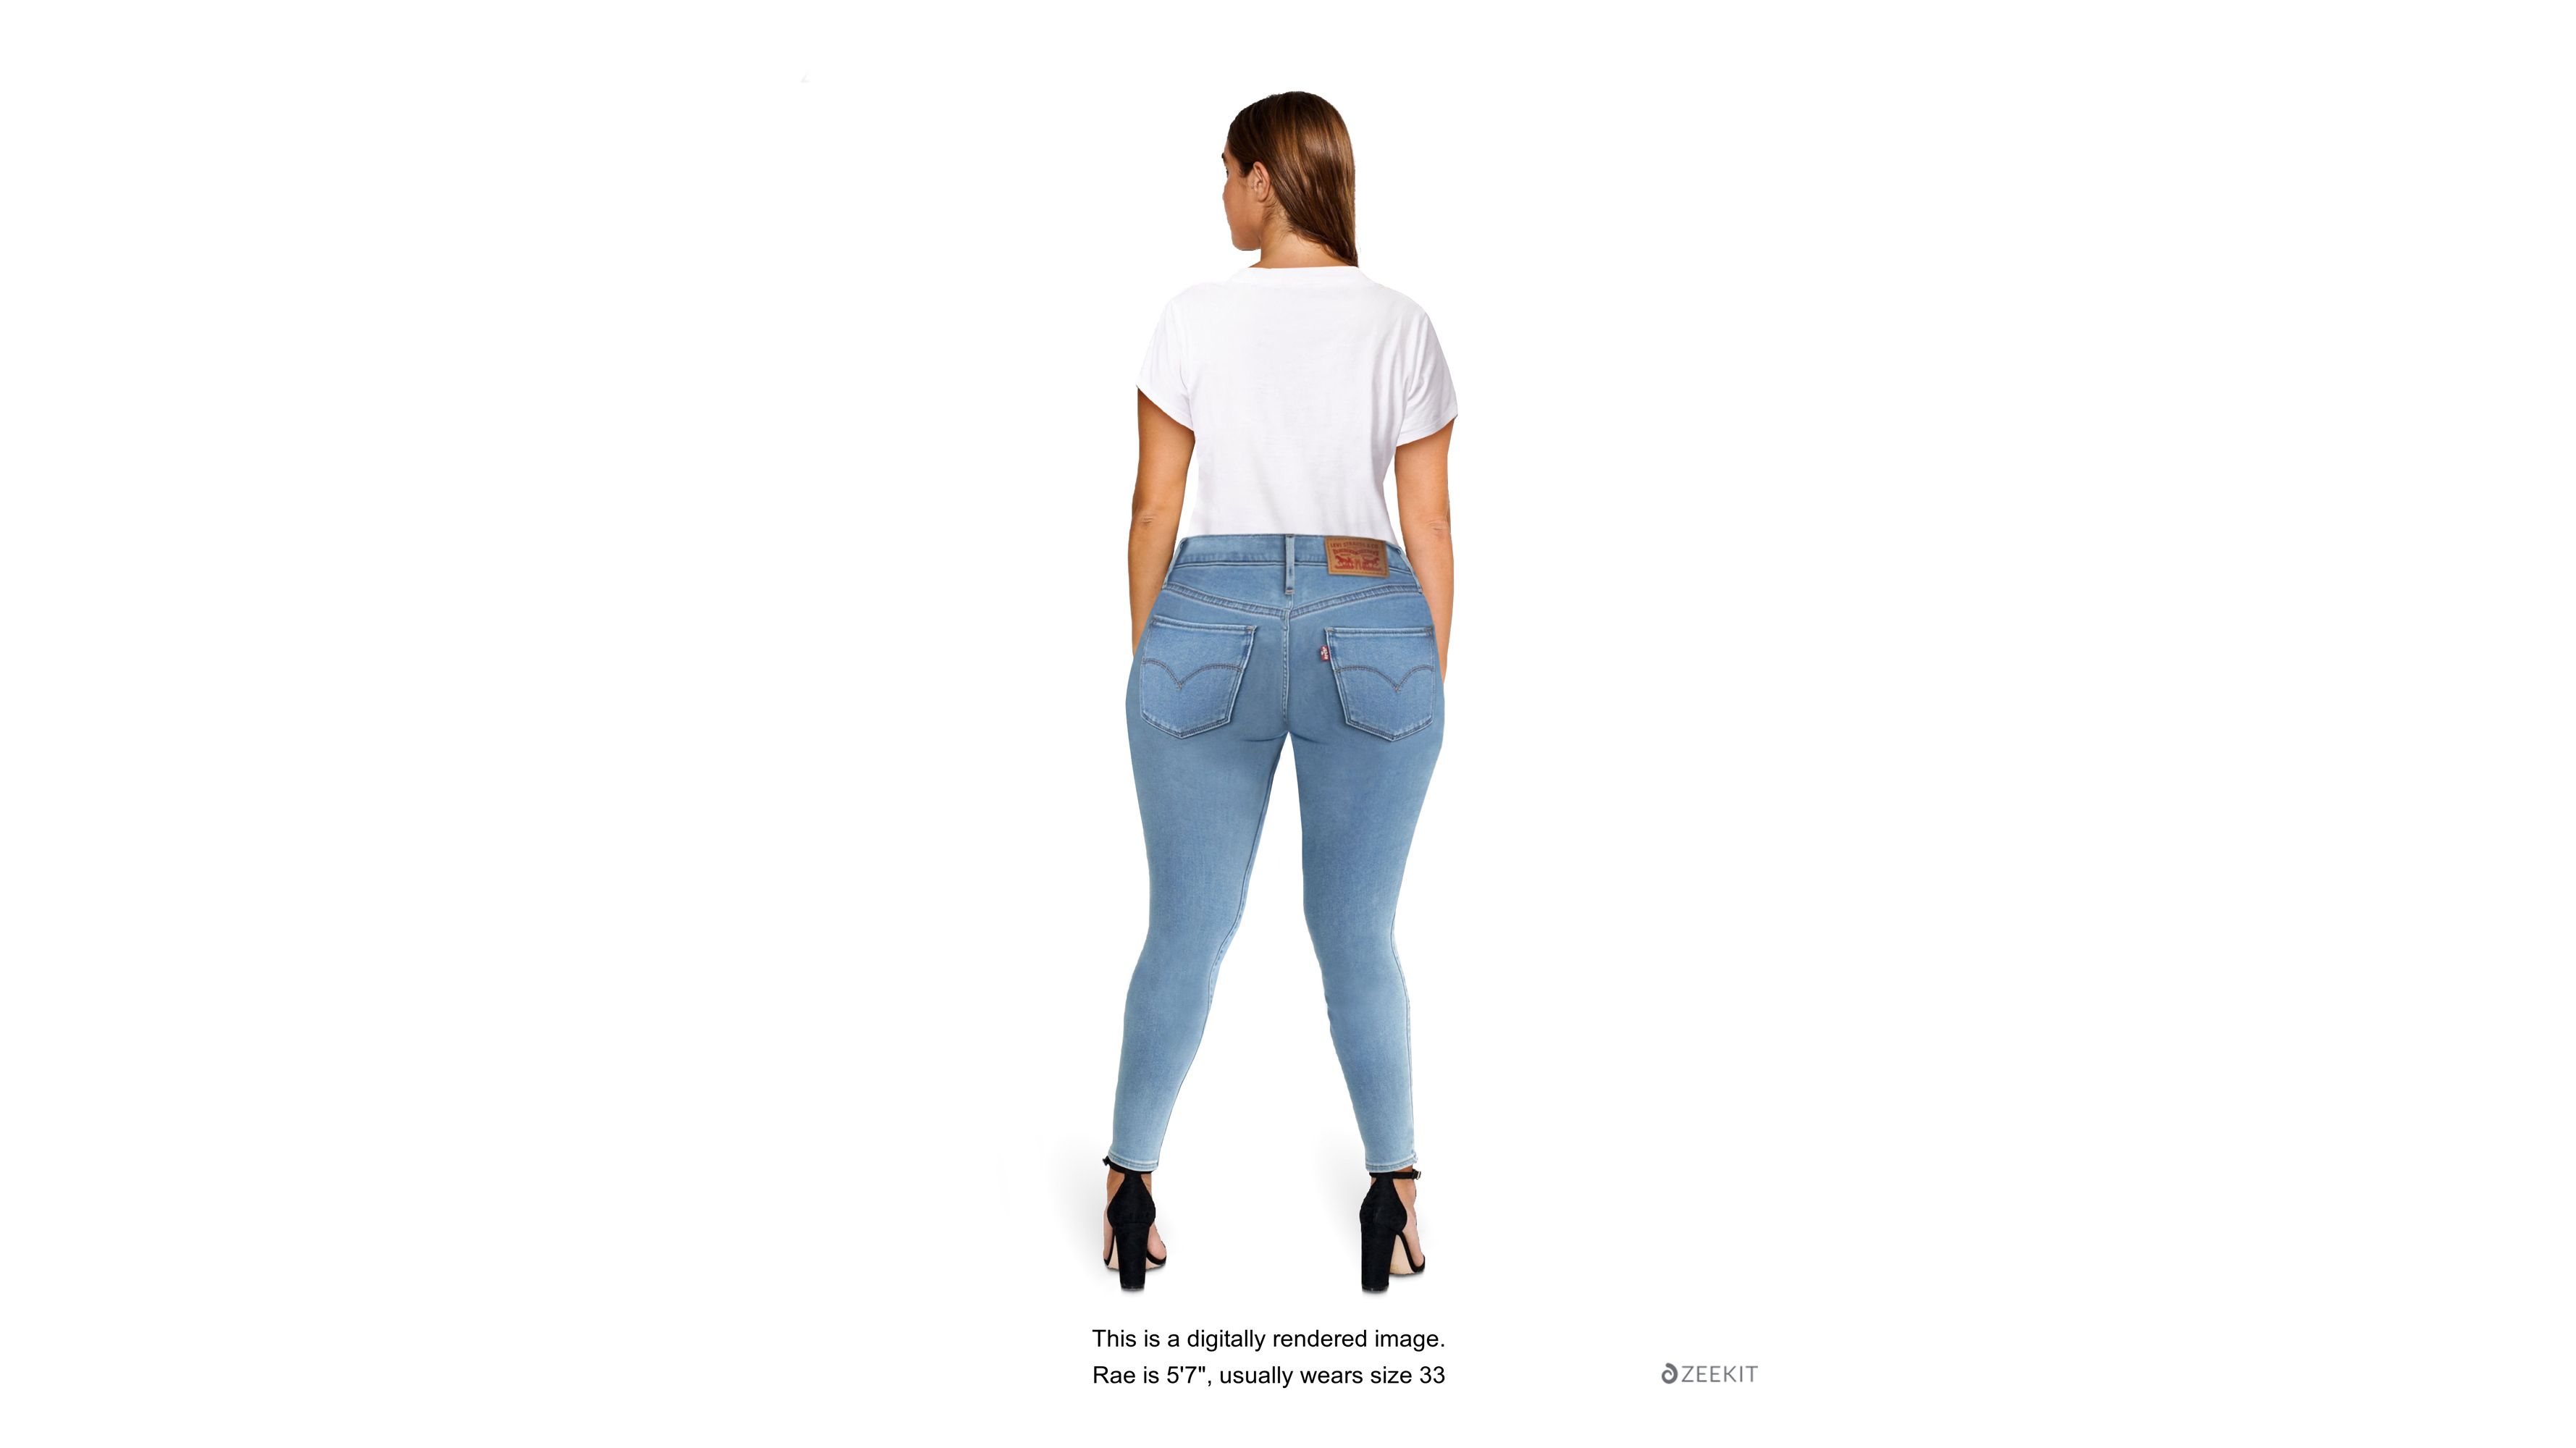 XIAOBU Cropped Jeggings Women's Elastic High Waist Skinny Thin 3/4 Jeans  Pocket Solid Casual Denim Capris Pants,Light Blue,S at  Women's Jeans  store